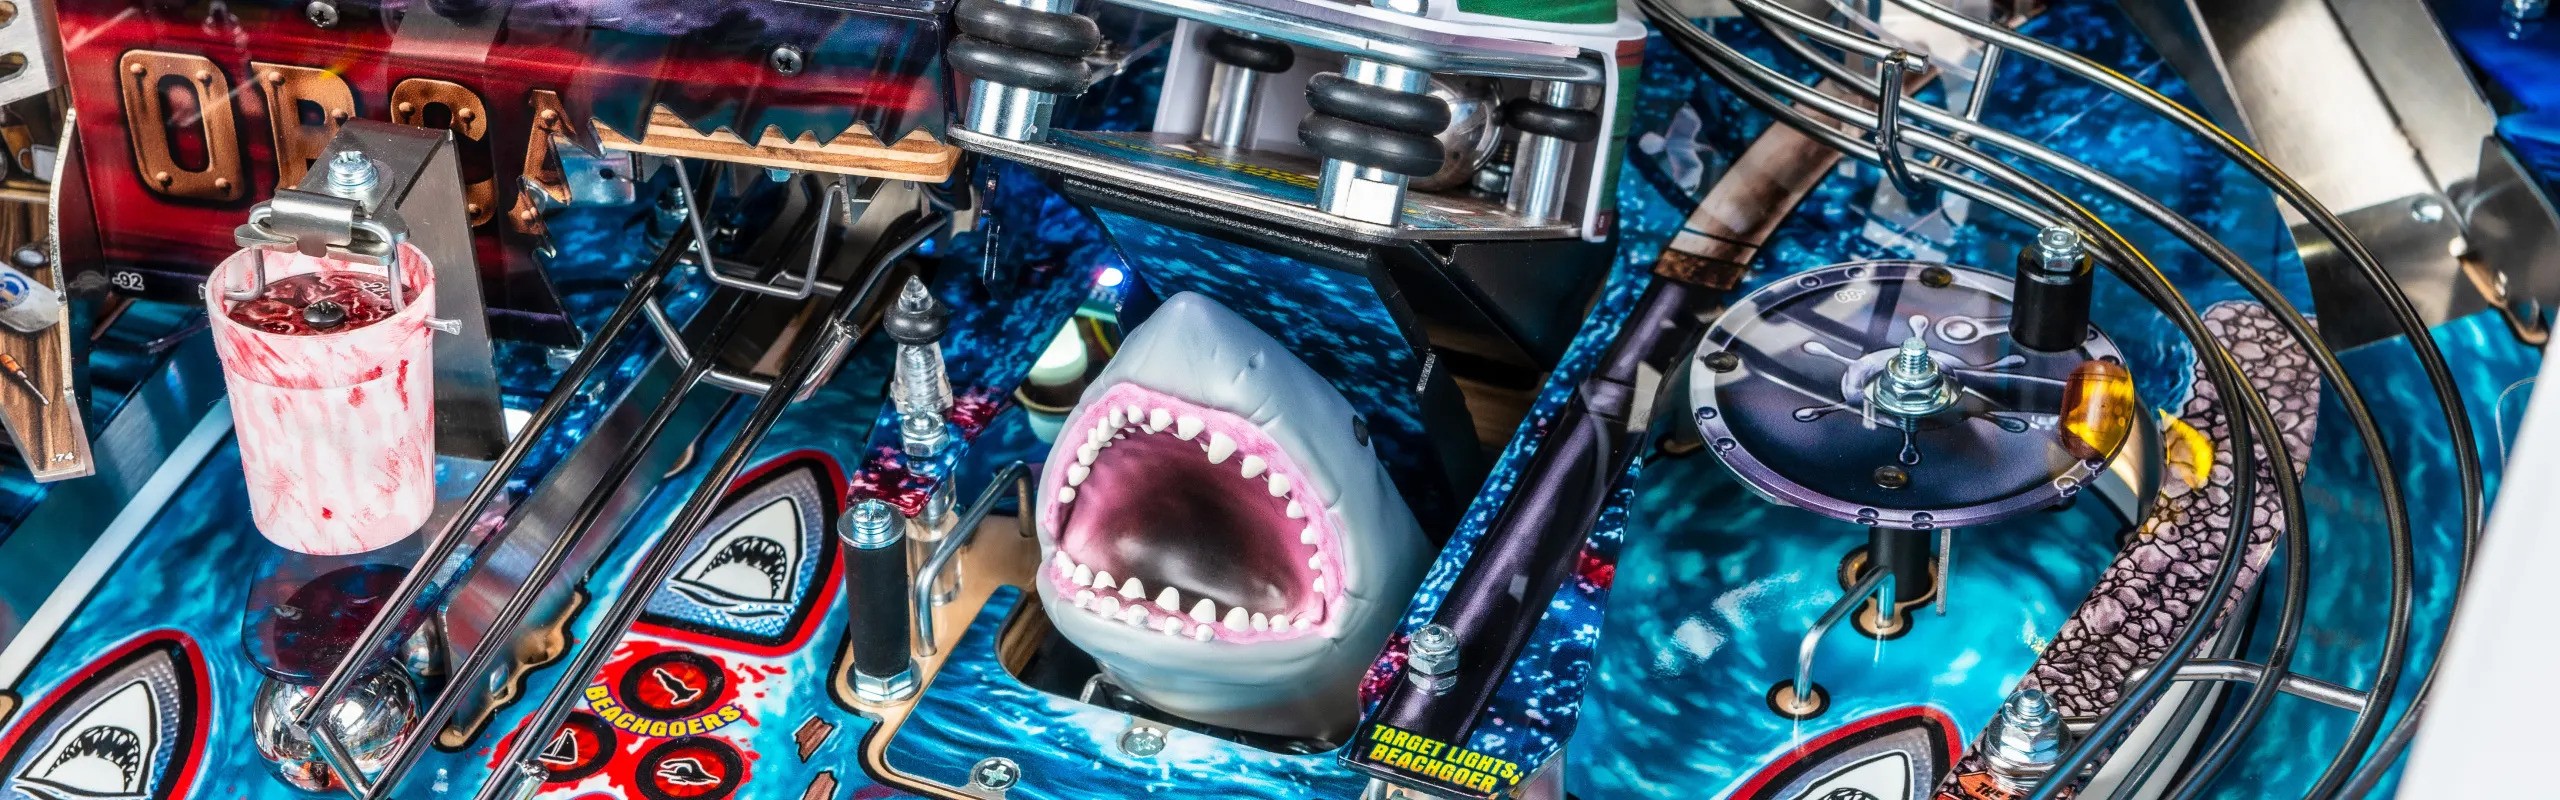 Stern Pinball JAWS release - Thailand Pool Tables